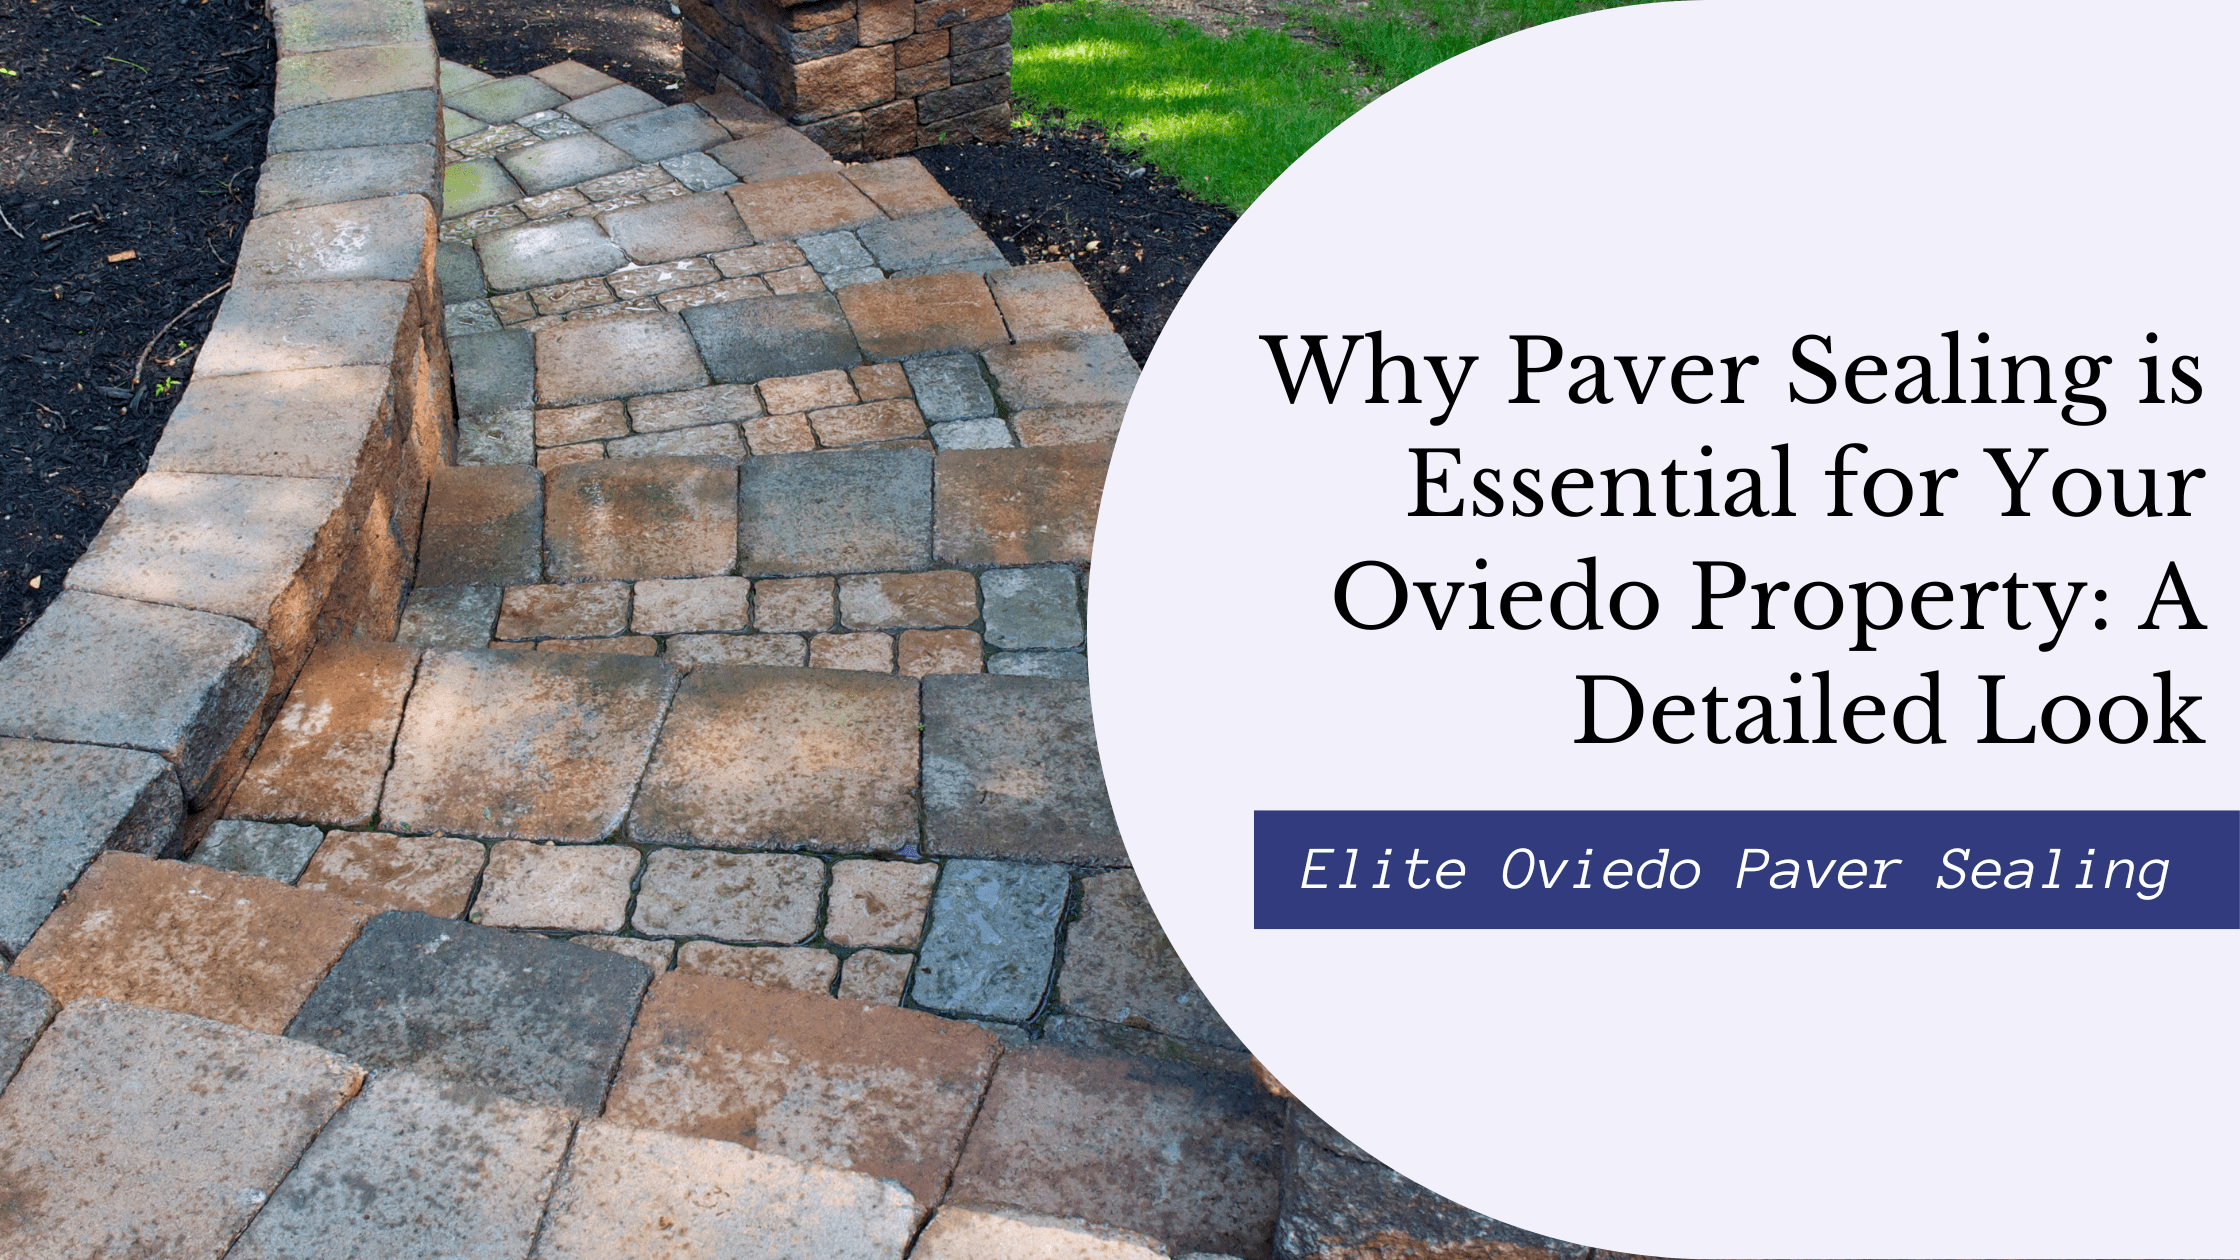 Why Paver Sealing is Essential for Your Oviedo Property: A Detailed Look